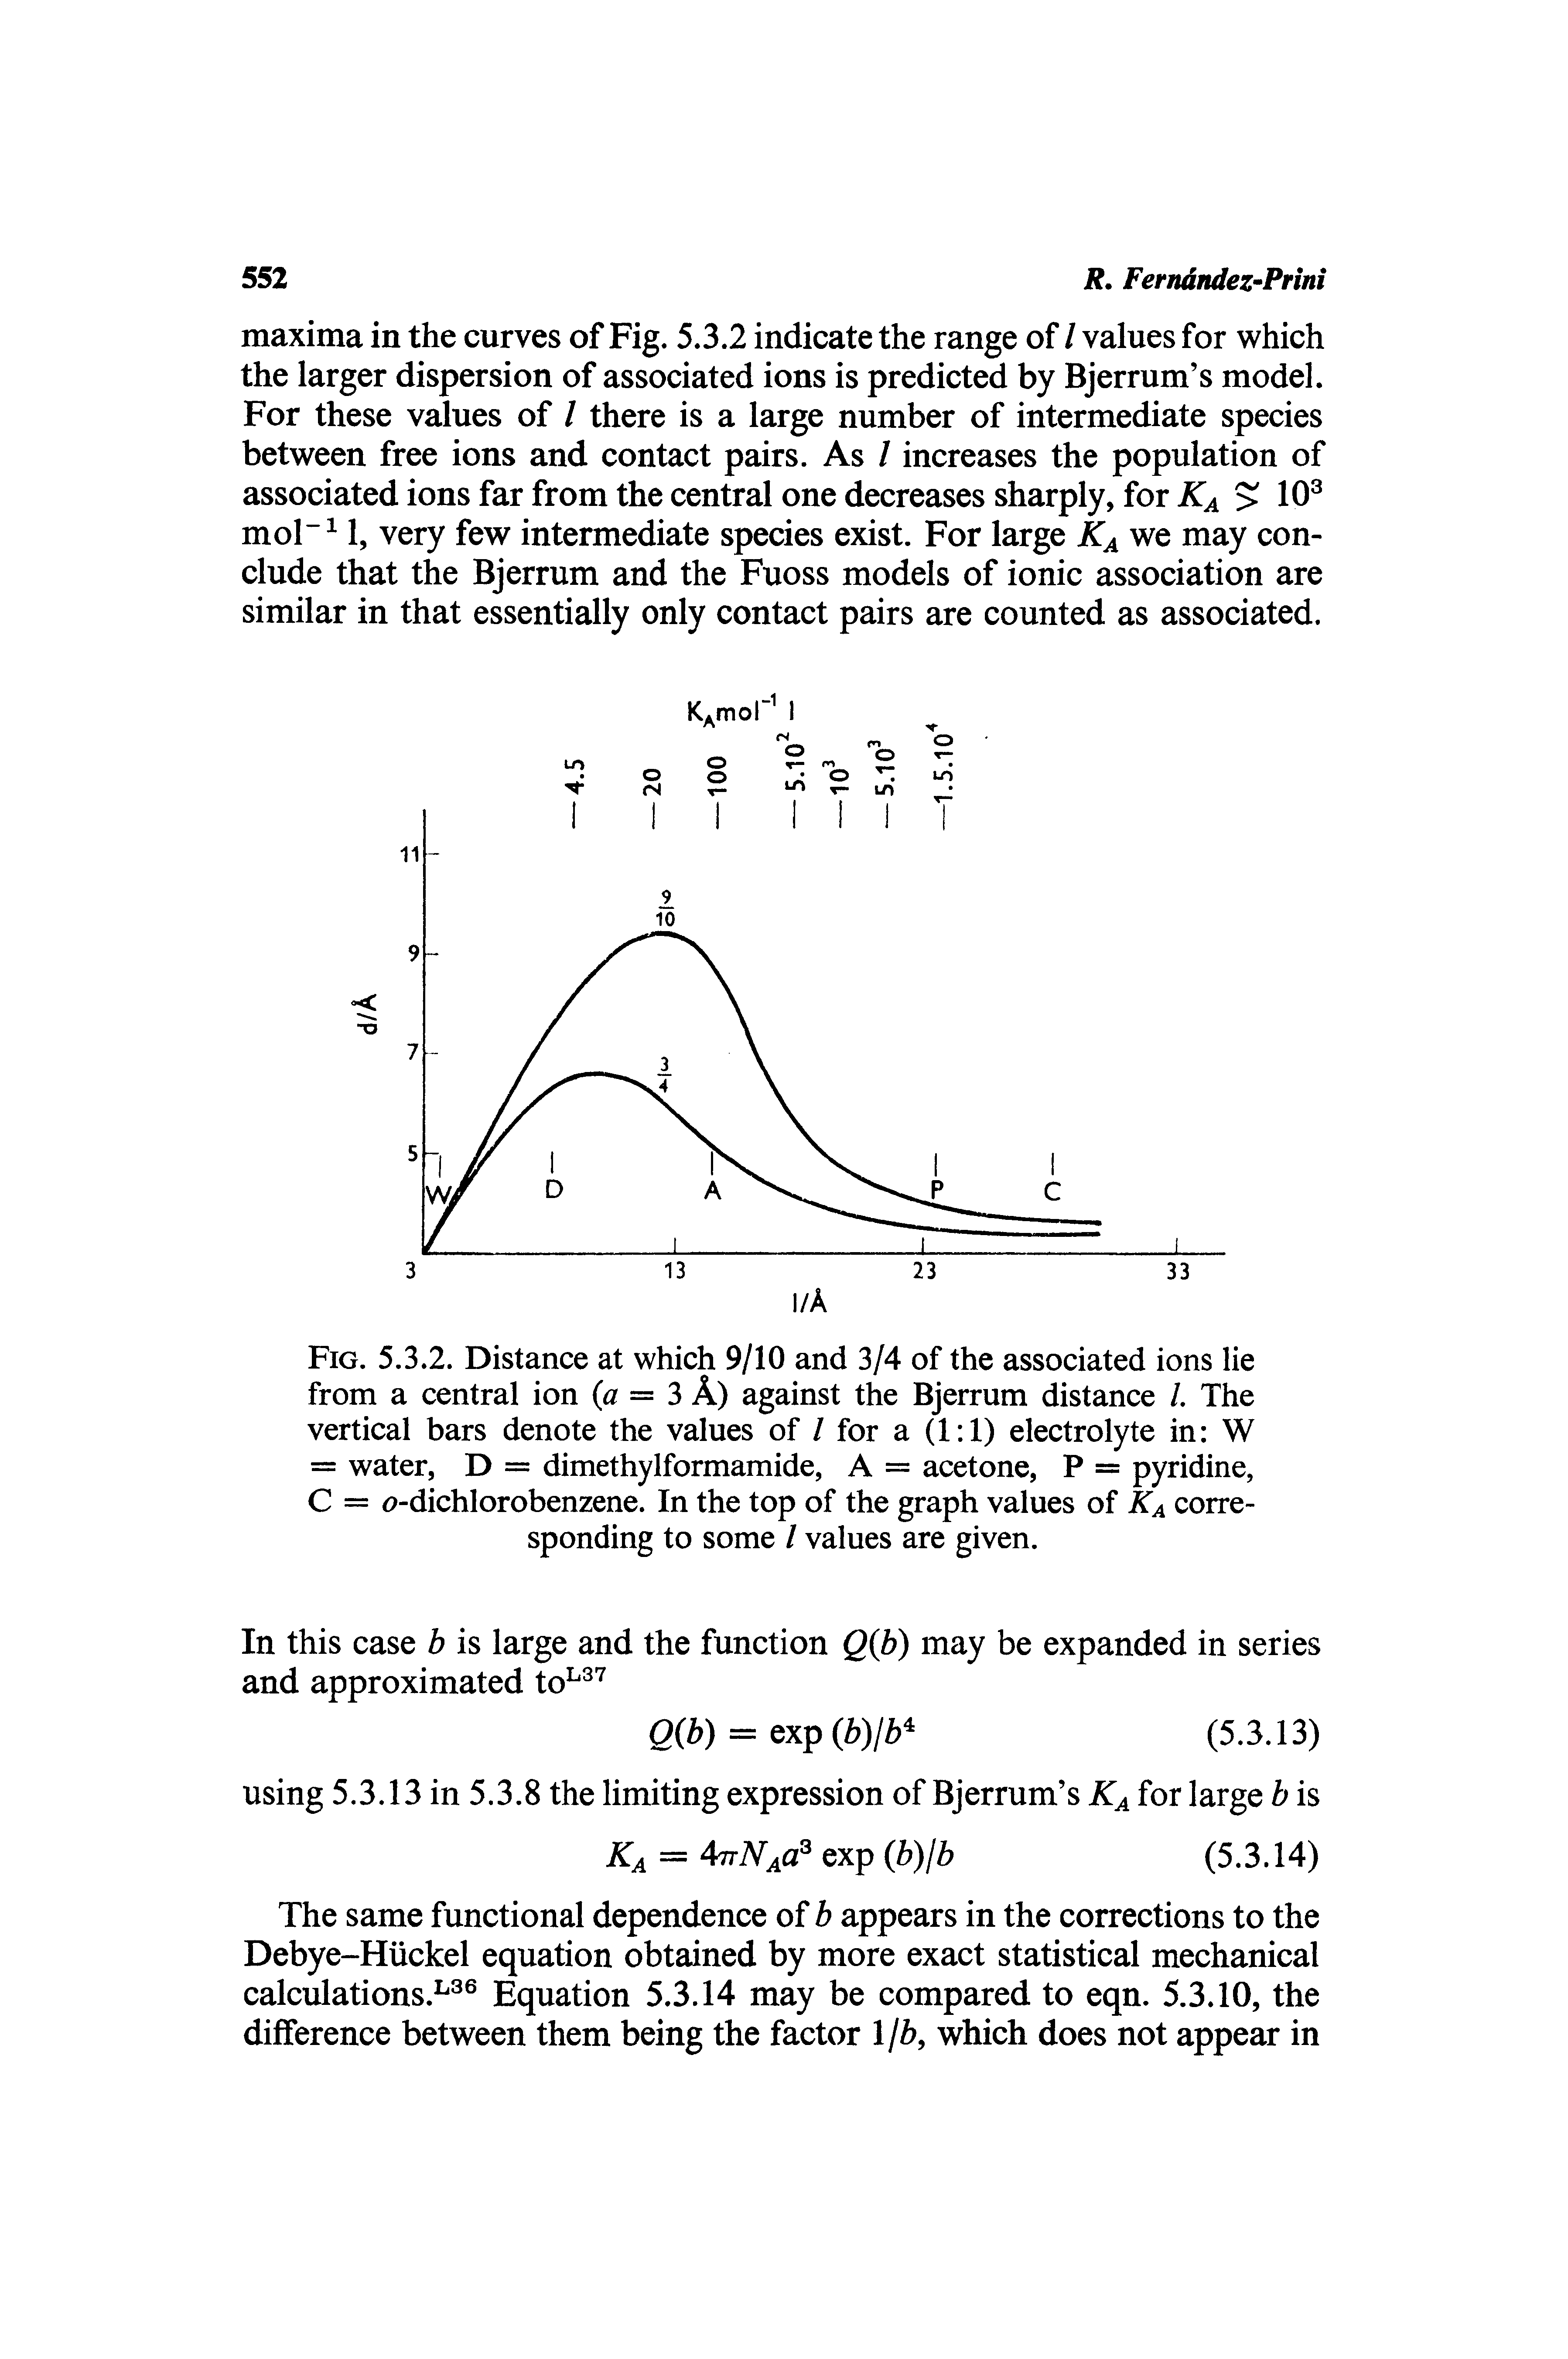 Fig. 5.3.2. Distance at which 9/10 and 3/4 of the associated ions lie from a central ion = 3 A) against the Bjerrum distance /. The vertical bars denote the values of / for a (1 1) electrolyte in W = water, D = dimethylformamide, A = acetone, P = pyridine, C = < -dichIorobenzene. In the top of the graph values of Ka corresponding to some / values are given.